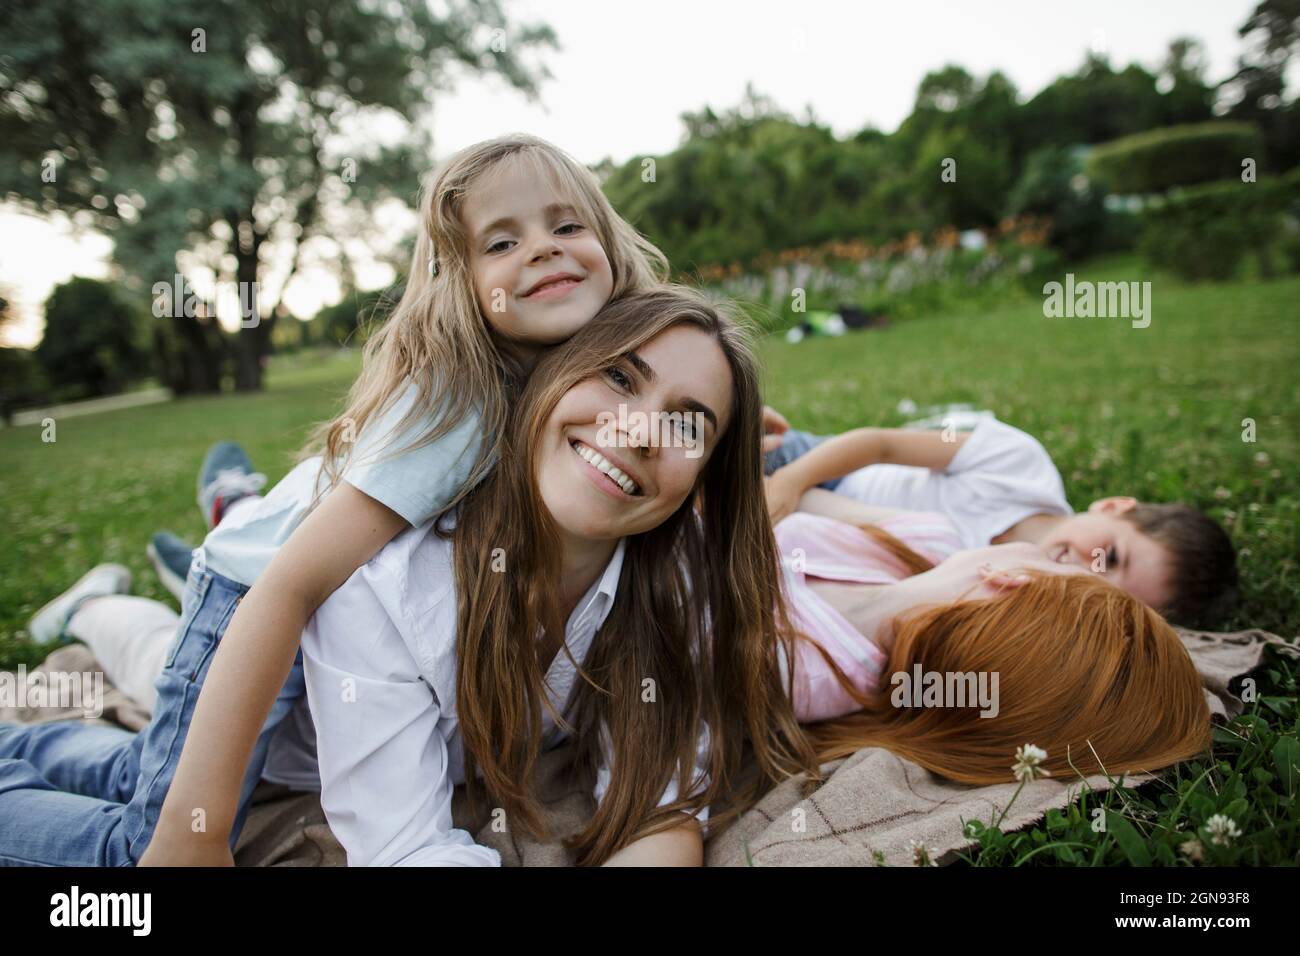 Girl embracing mother by siblings at public park Stock Photo